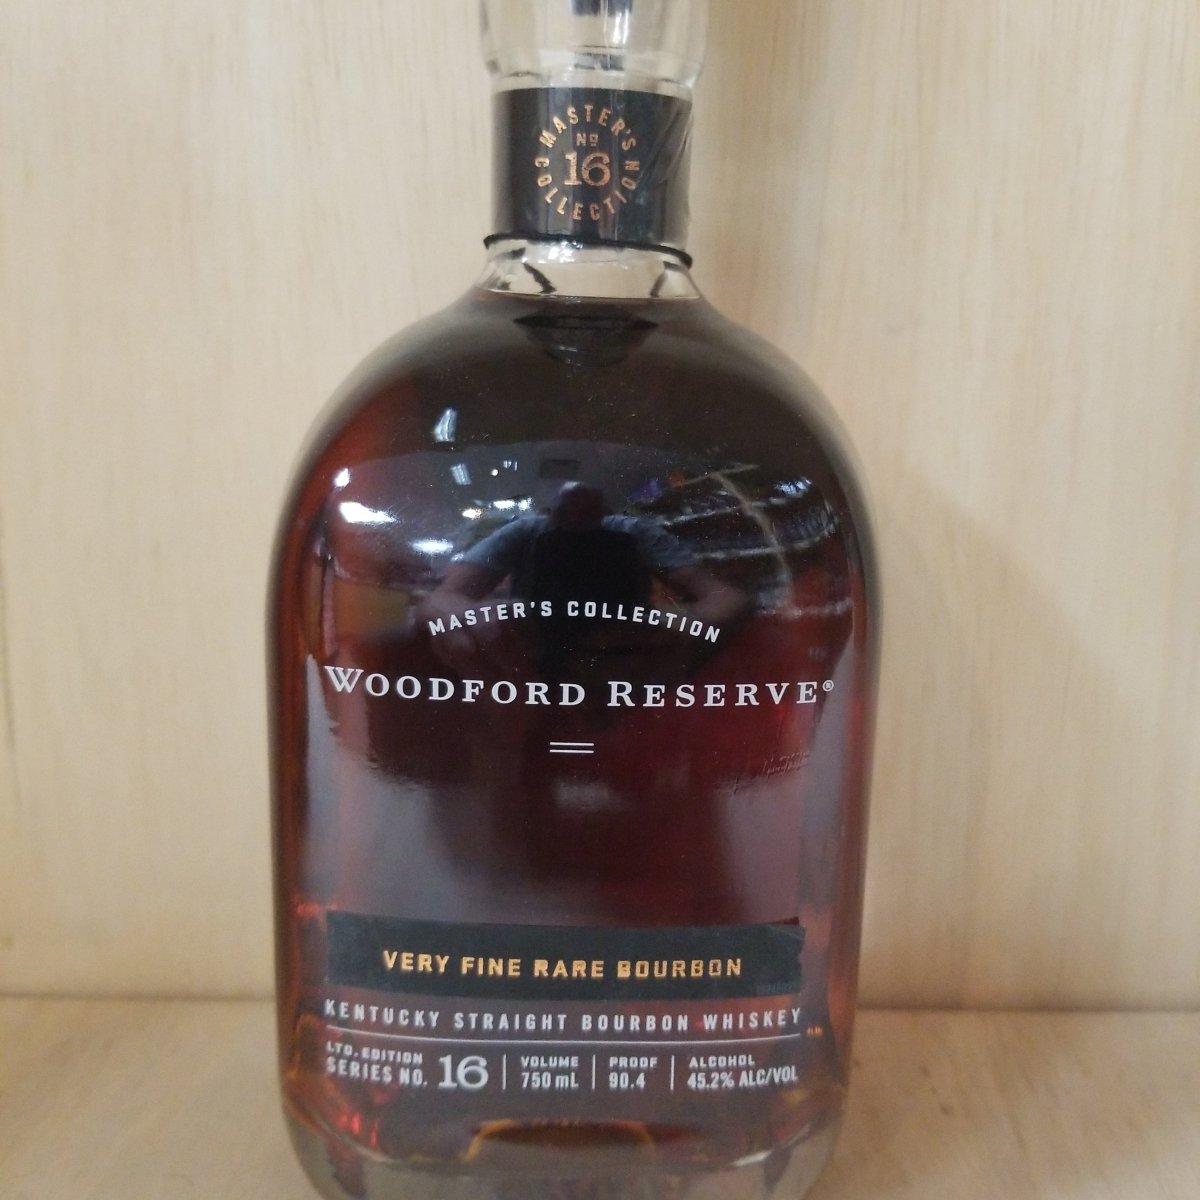 Woodford Reserve Master Collection Very Fine Rare Bourbon 750ml (Series No. 16) - Sip &amp; Say